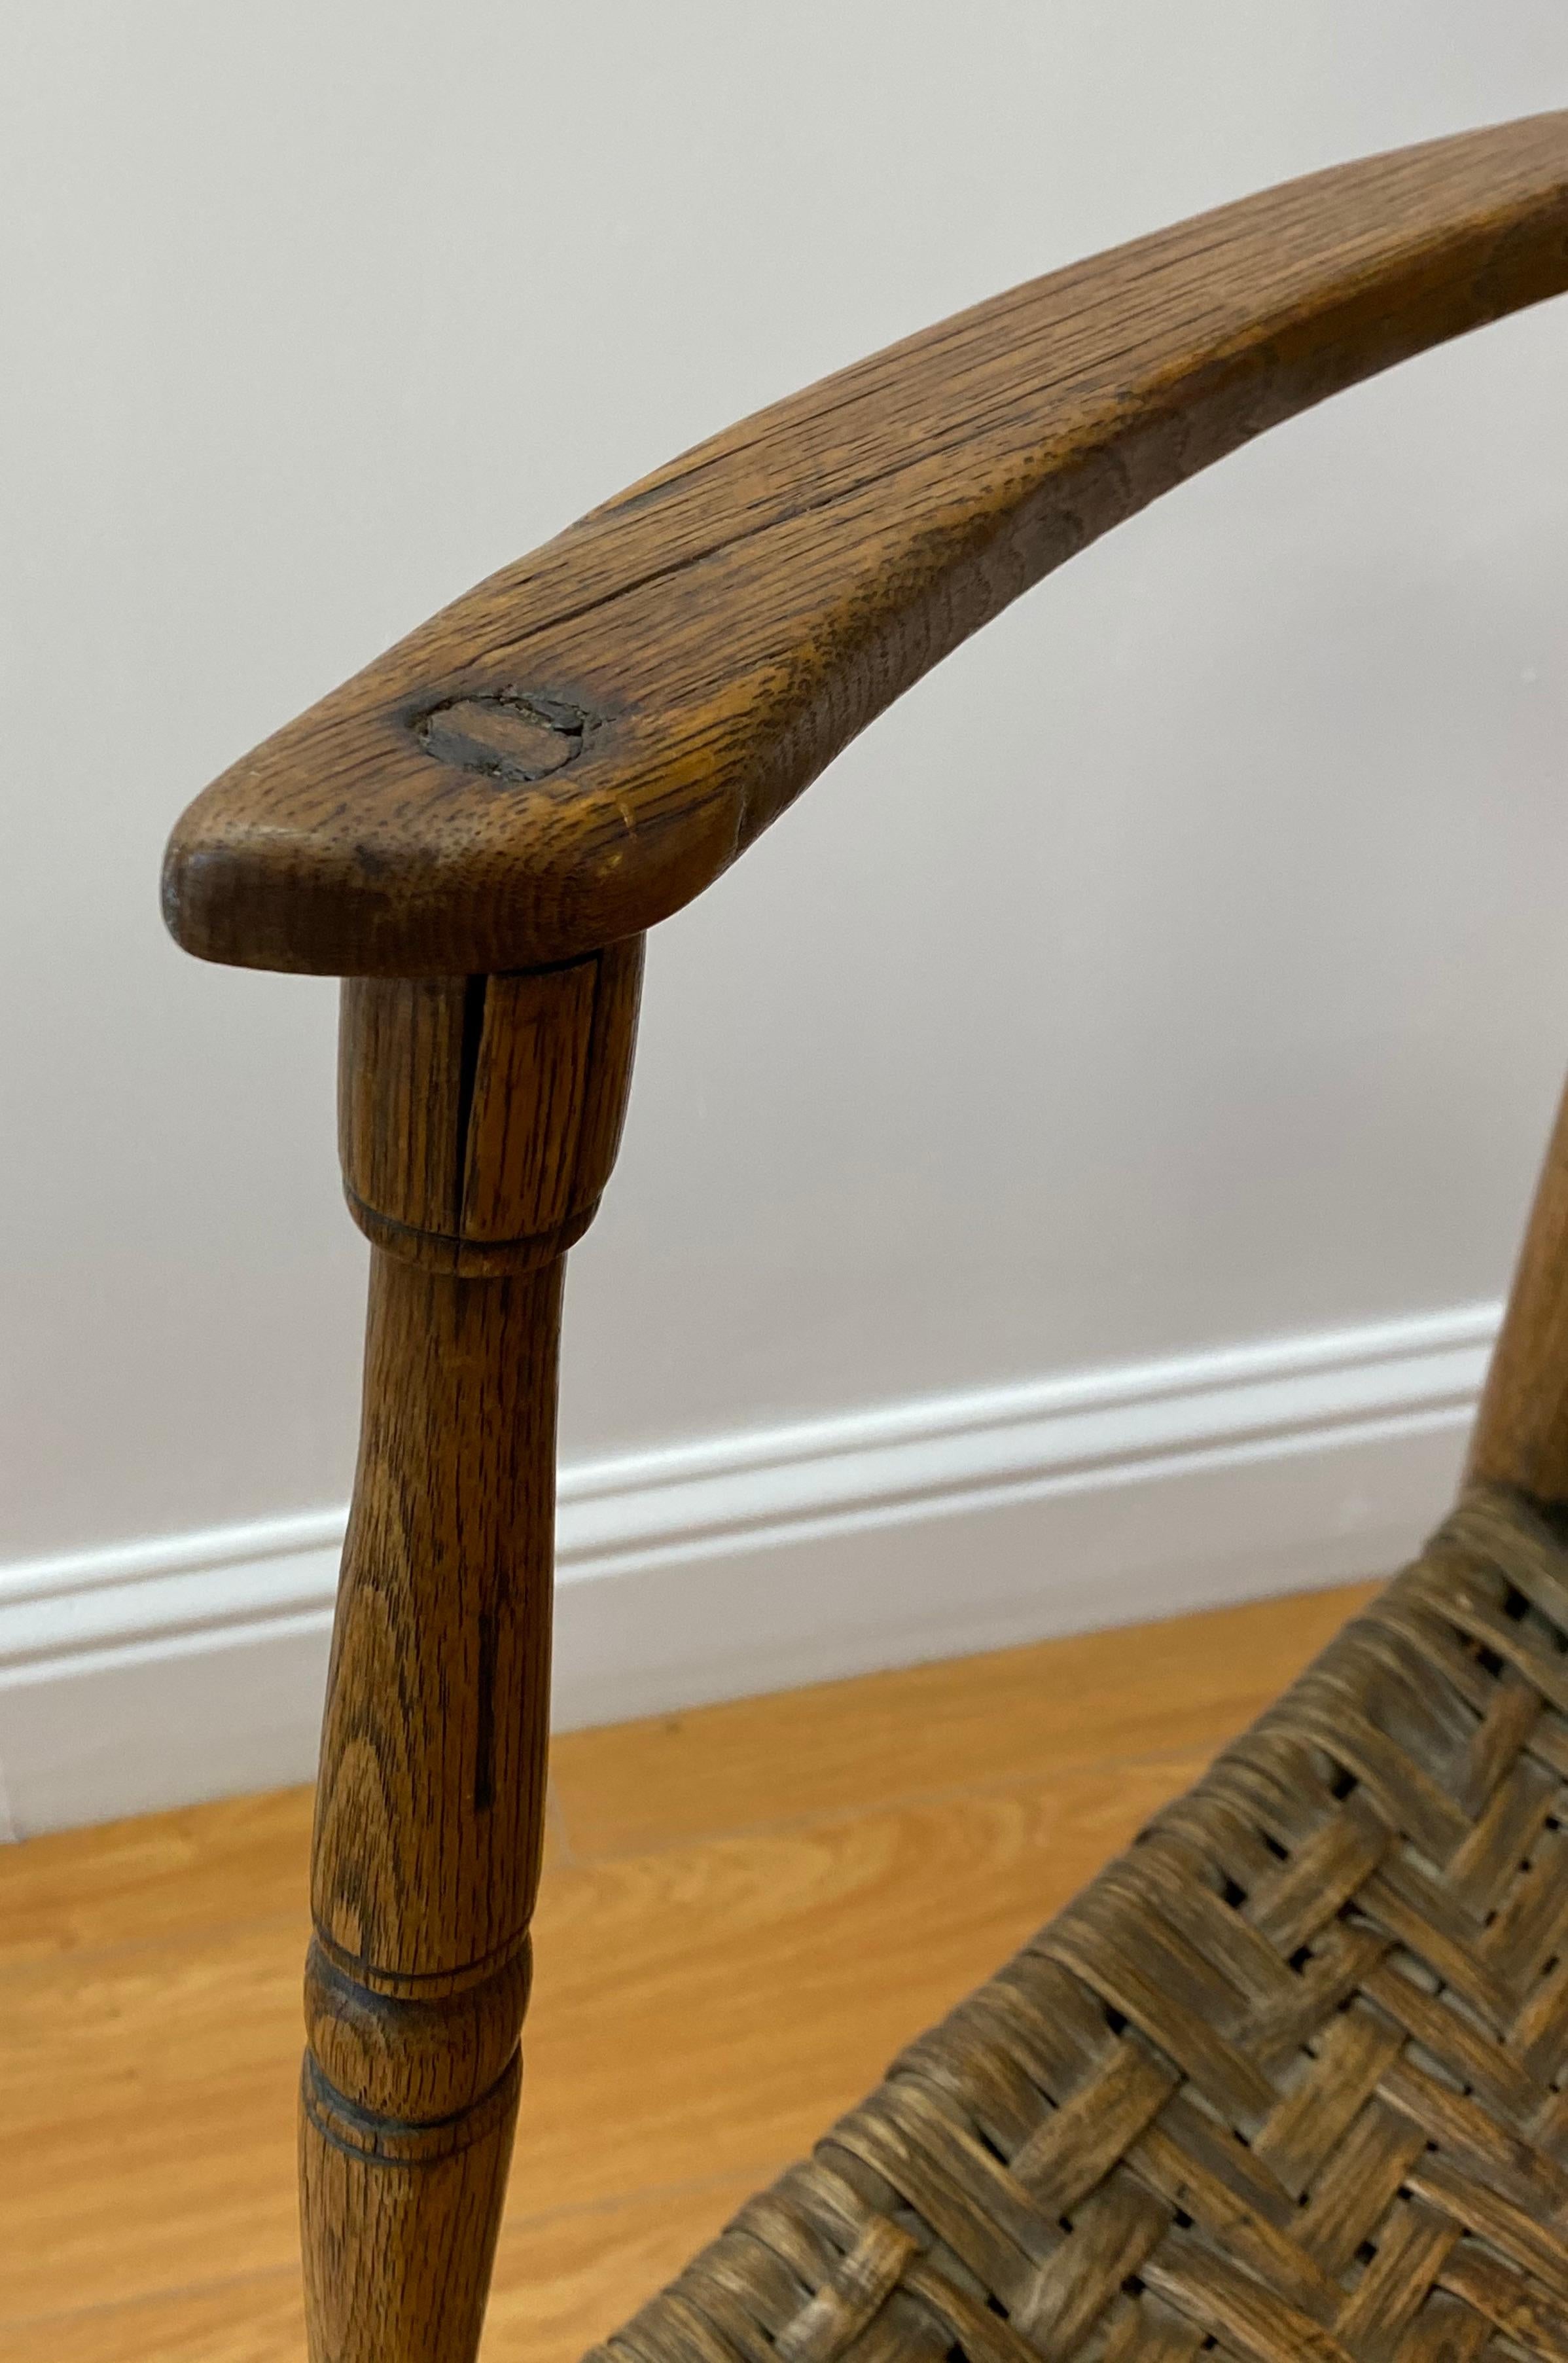 18th to 19th Century Ladder Back Chair with Reed Seat 1